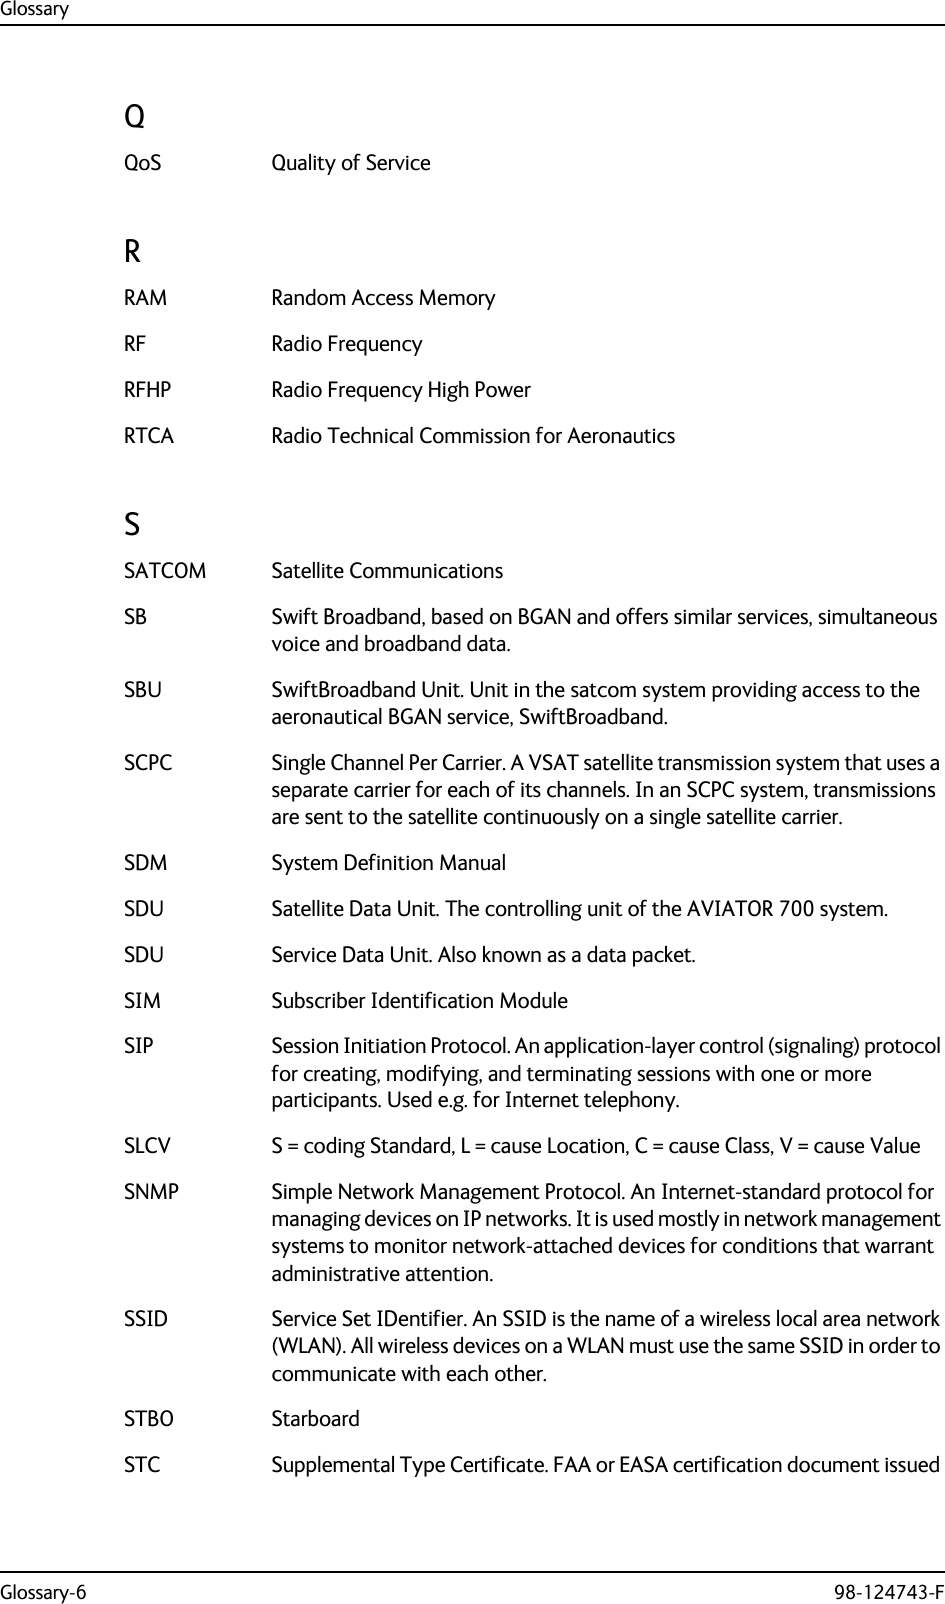 GlossaryGlossary-6 98-124743-FQQoS Quality of Service RRAM Random Access Memory RF Radio Frequency RFHP Radio Frequency High Power RTCA Radio Technical Commission for Aeronautics SSATCOM Satellite Communications SB Swift Broadband, based on BGAN and offers similar services, simultaneous voice and broadband data. SBU SwiftBroadband Unit. Unit in the satcom system providing access to the aeronautical BGAN service, SwiftBroadband. SCPC Single Channel Per Carrier. A VSAT satellite transmission system that uses a separate carrier for each of its channels. In an SCPC system, transmissions are sent to the satellite continuously on a single satellite carrier. SDM System Definition Manual SDU Satellite Data Unit. The controlling unit of the AVIATOR 700 system. SDU Service Data Unit. Also known as a data packet. SIM Subscriber Identification Module SIP Session Initiation Protocol. An application-layer control (signaling) protocol for creating, modifying, and terminating sessions with one or more participants. Used e.g. for Internet telephony. SLCV S = coding Standard, L = cause Location, C = cause Class, V = cause Value SNMP Simple Network Management Protocol. An Internet-standard protocol for managing devices on IP networks. It is used mostly in network management systems to monitor network-attached devices for conditions that warrant administrative attention. SSID Service Set IDentifier. An SSID is the name of a wireless local area network (WLAN). All wireless devices on a WLAN must use the same SSID in order to communicate with each other. STBO Starboard STC Supplemental Type Certificate. FAA or EASA certification document issued 